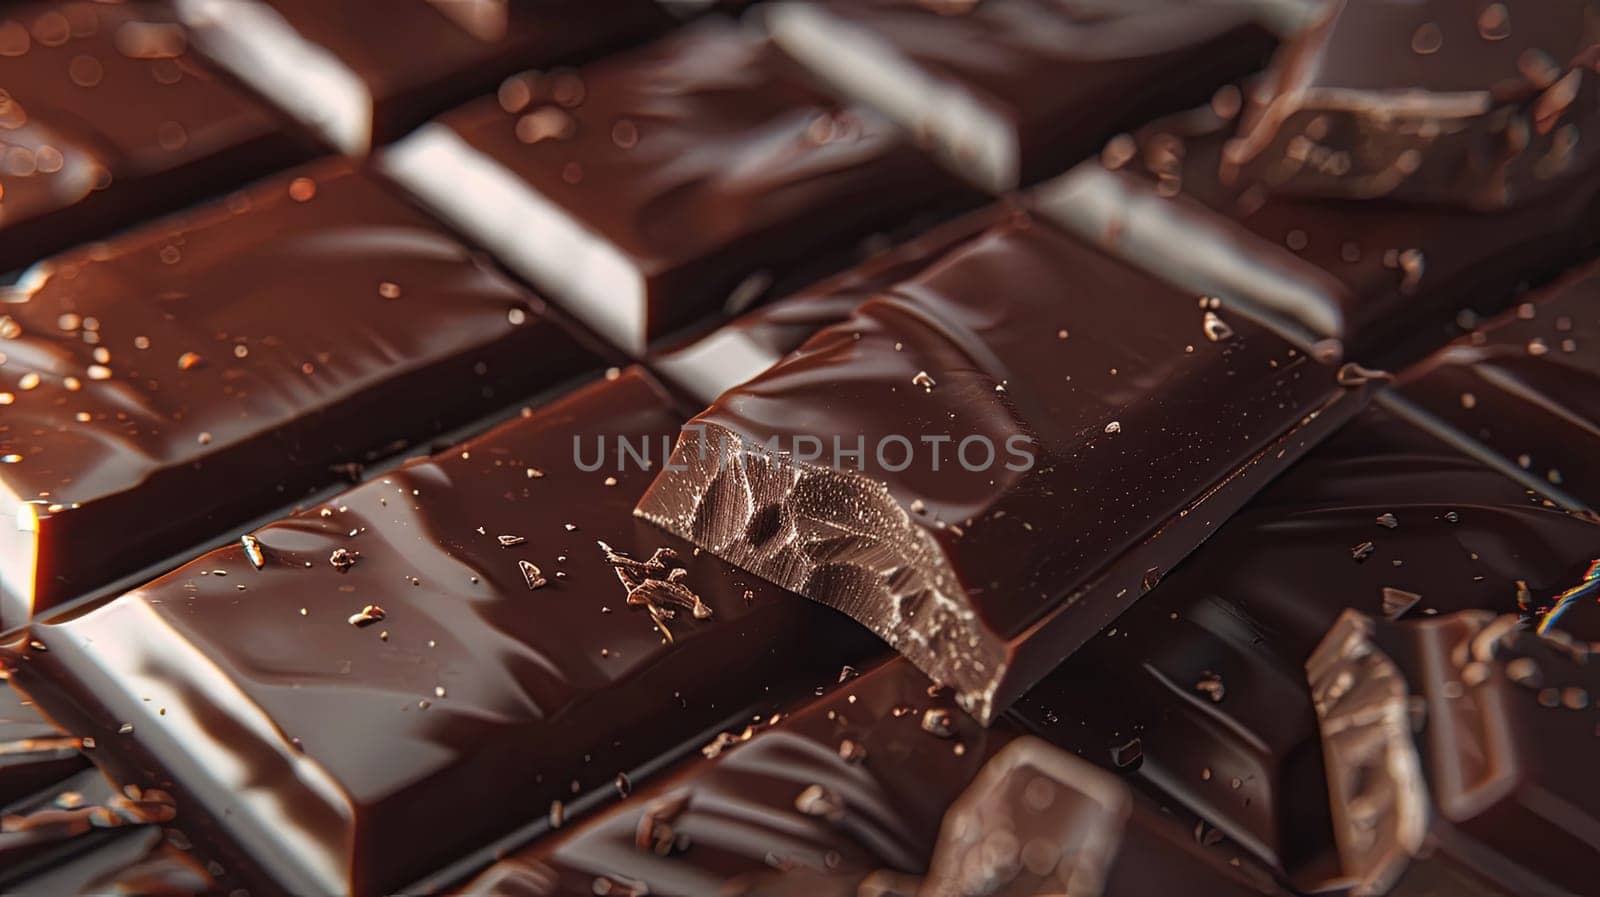 Detailed view of a smooth chocolate bar, showcasing its break lines, dark color, and even surface.